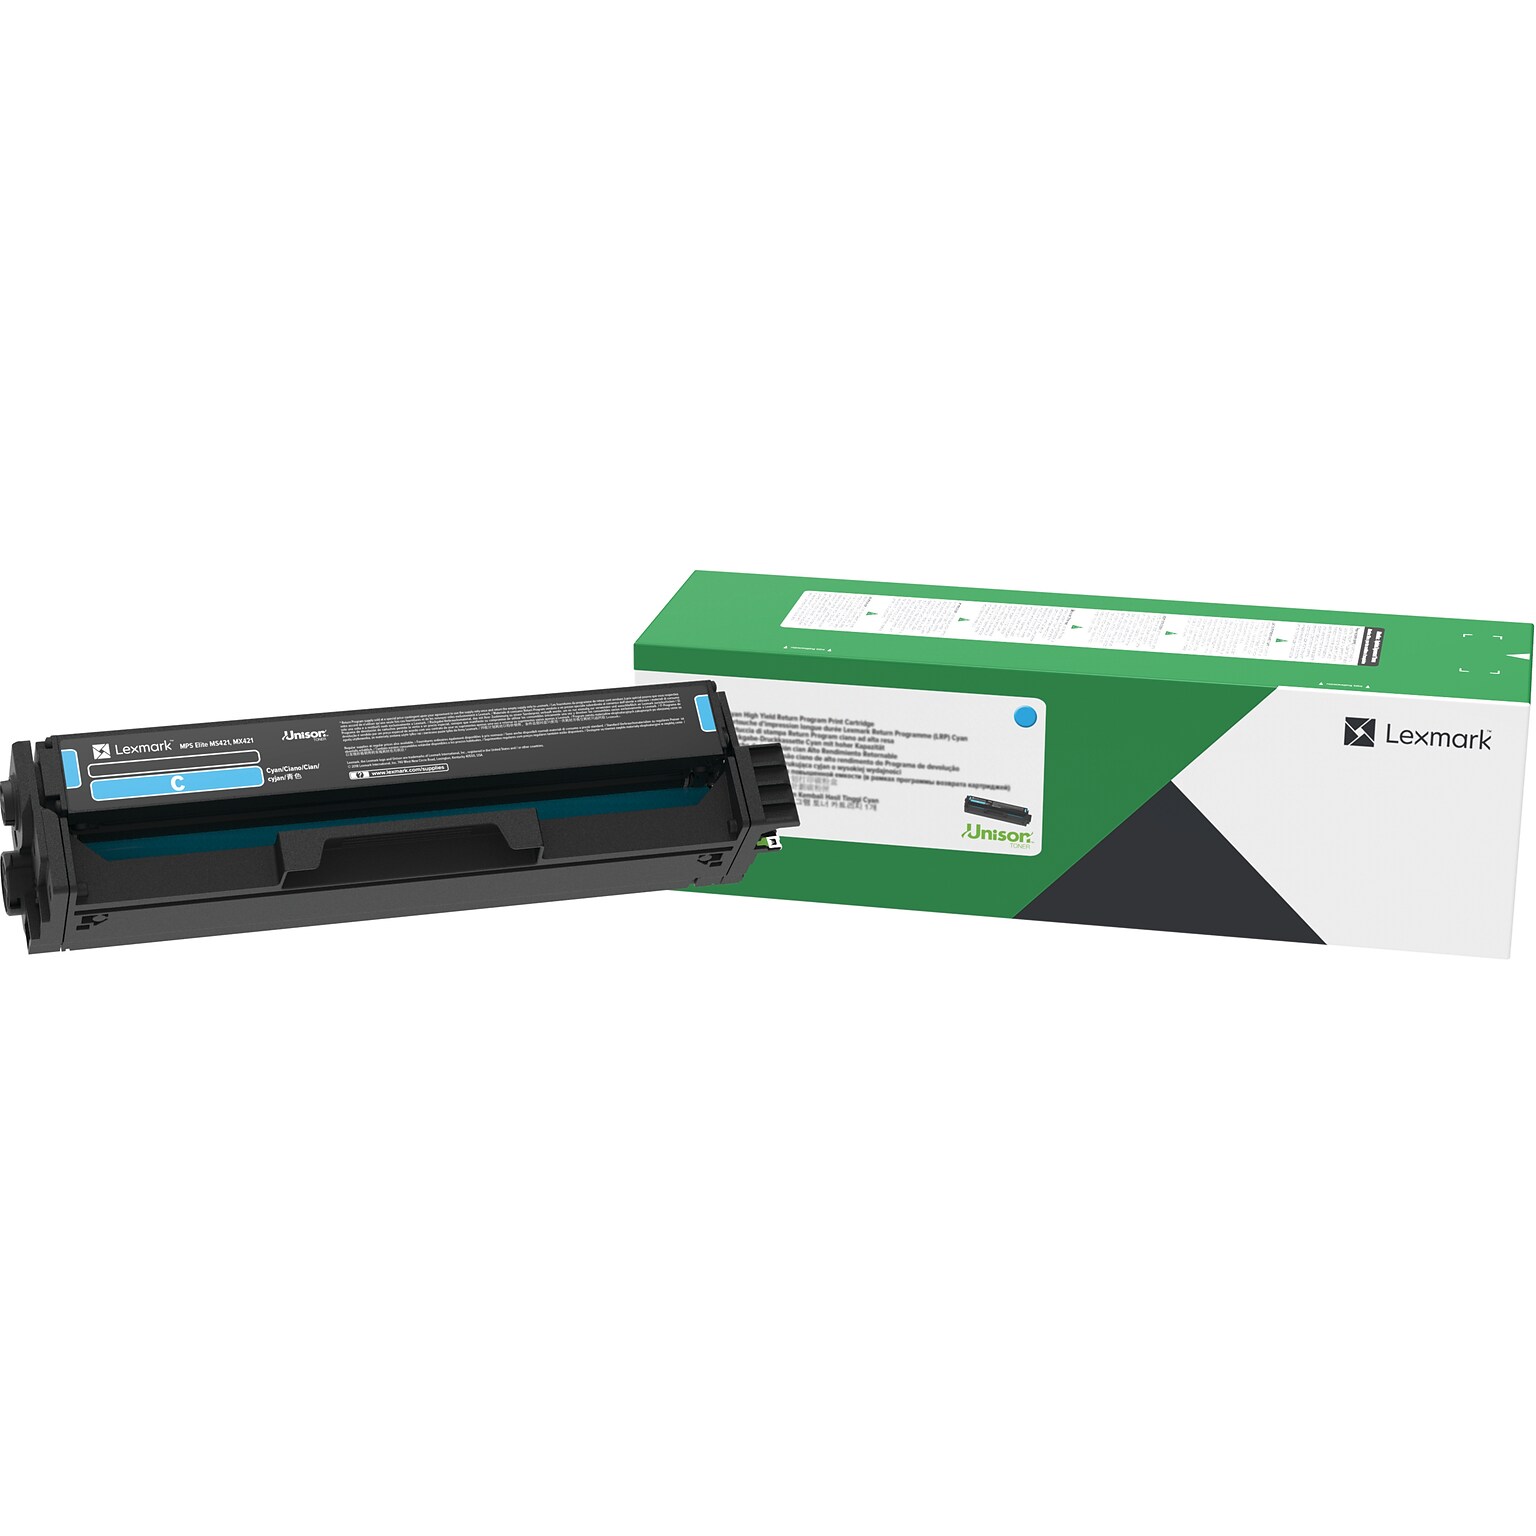 Lexmark C341XC0 Cyan Extra High Yield Toner Cartridge, Prints Up to 4,500 Pages